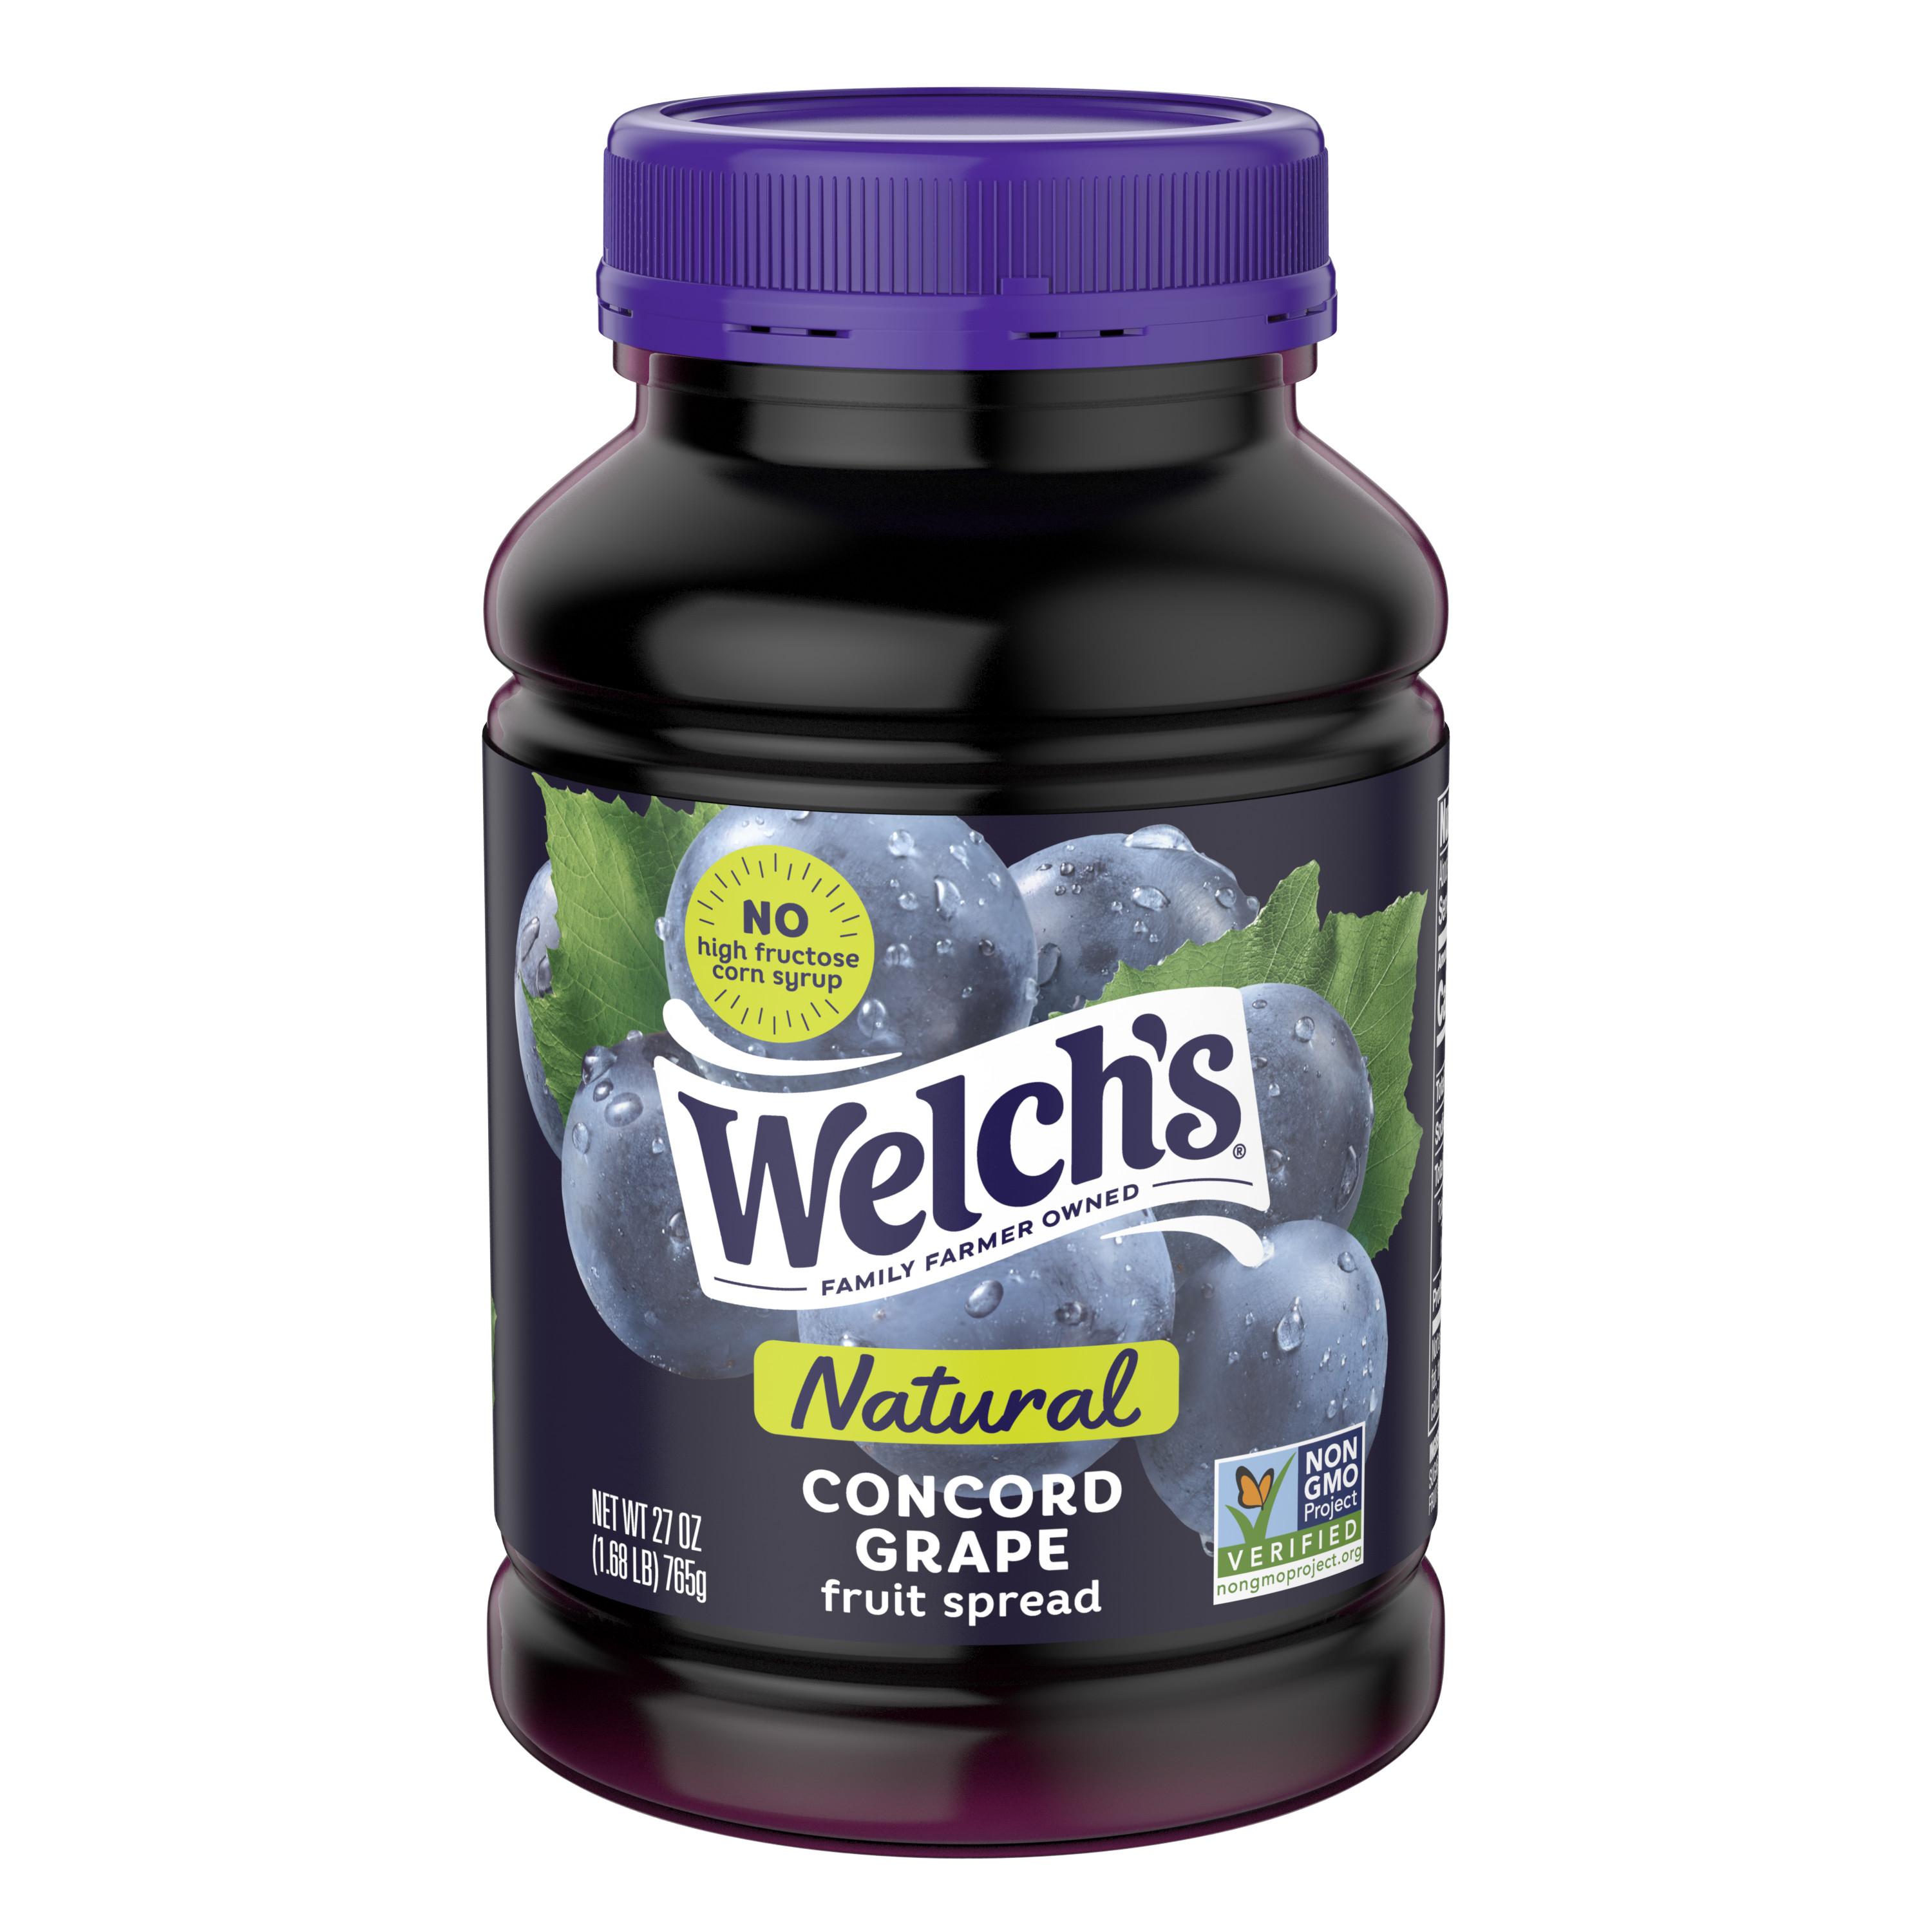 Welch's Natural Concord Grape Spread, 27 oz Jar - image 1 of 9